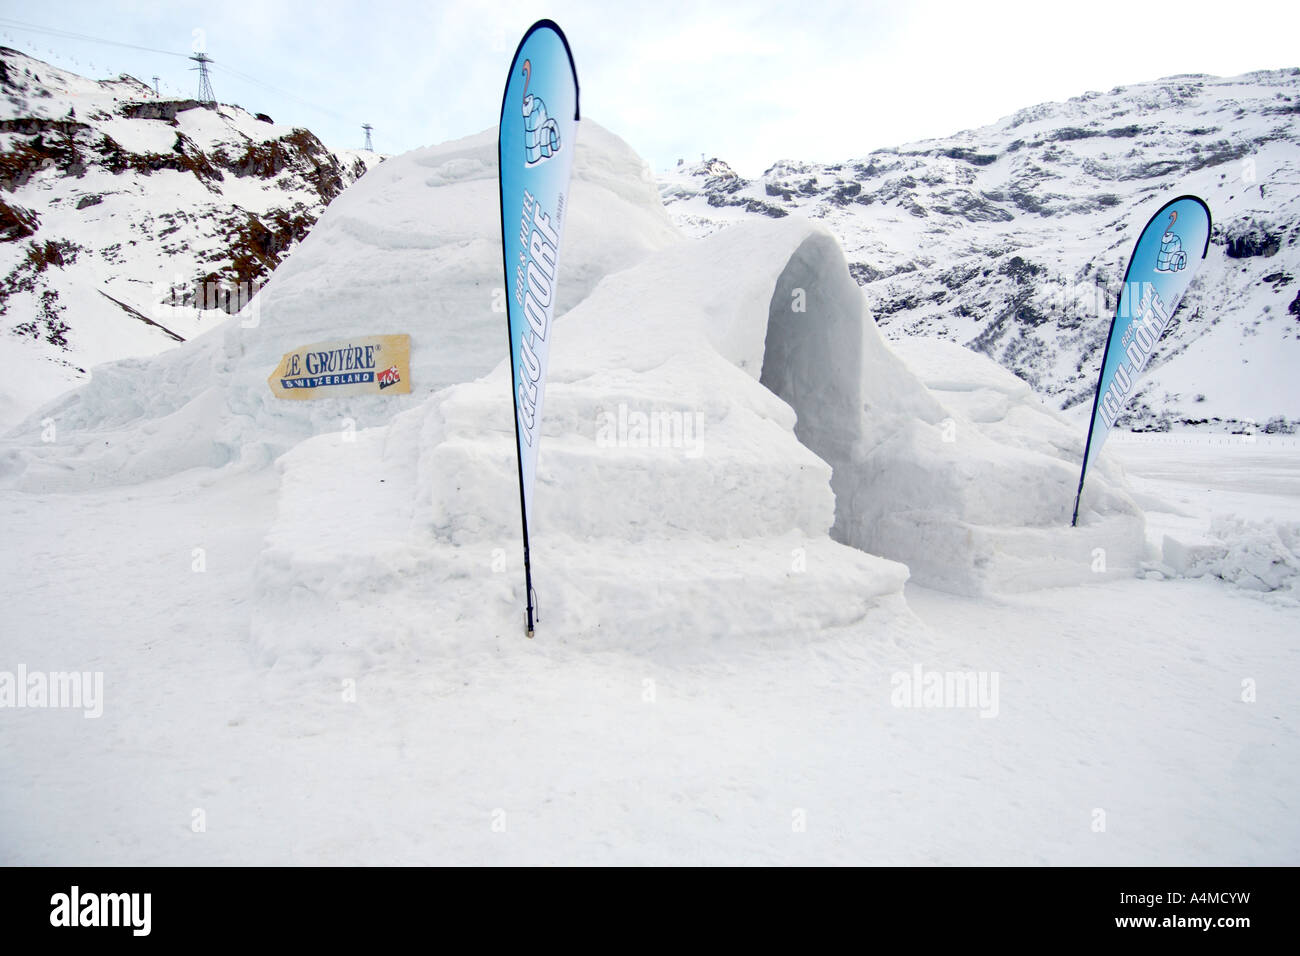 Exterior of the Iglu dorf ice hotel on the slopes of Mount Titlis in Switzerland. Stock Photo